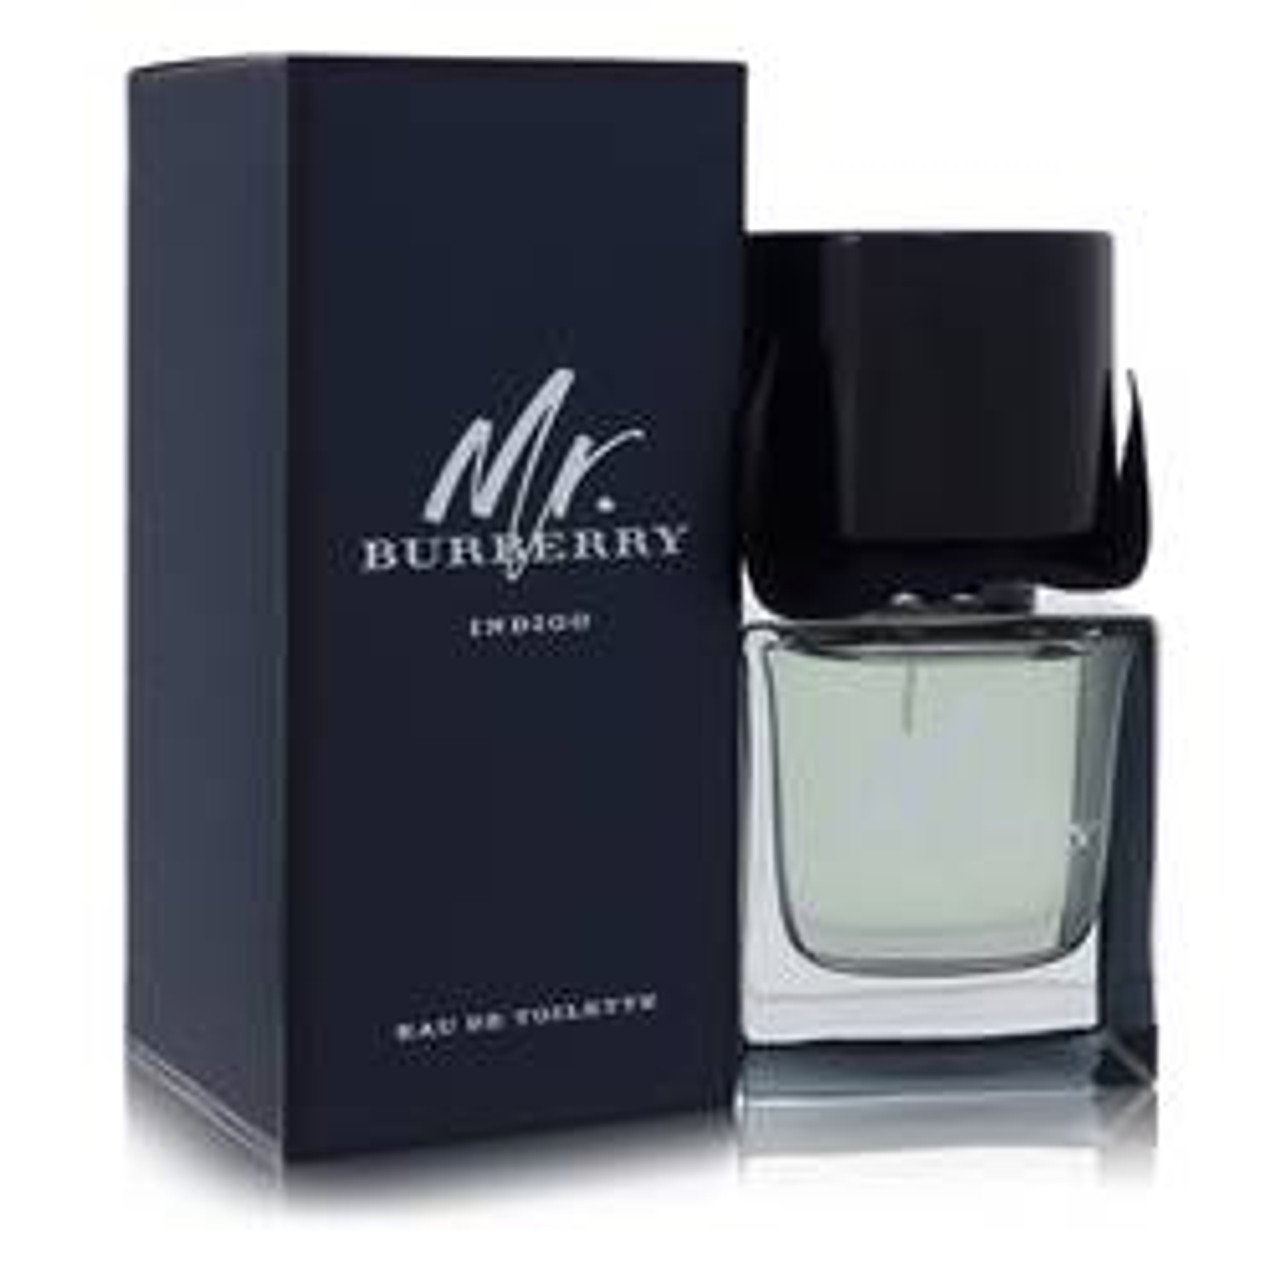 Mr Burberry Indigo Cologne By Burberry Eau De Toilette Spray 1.6 oz for Men - [From 112.00 - Choose pk Qty ] - *Ships from Miami